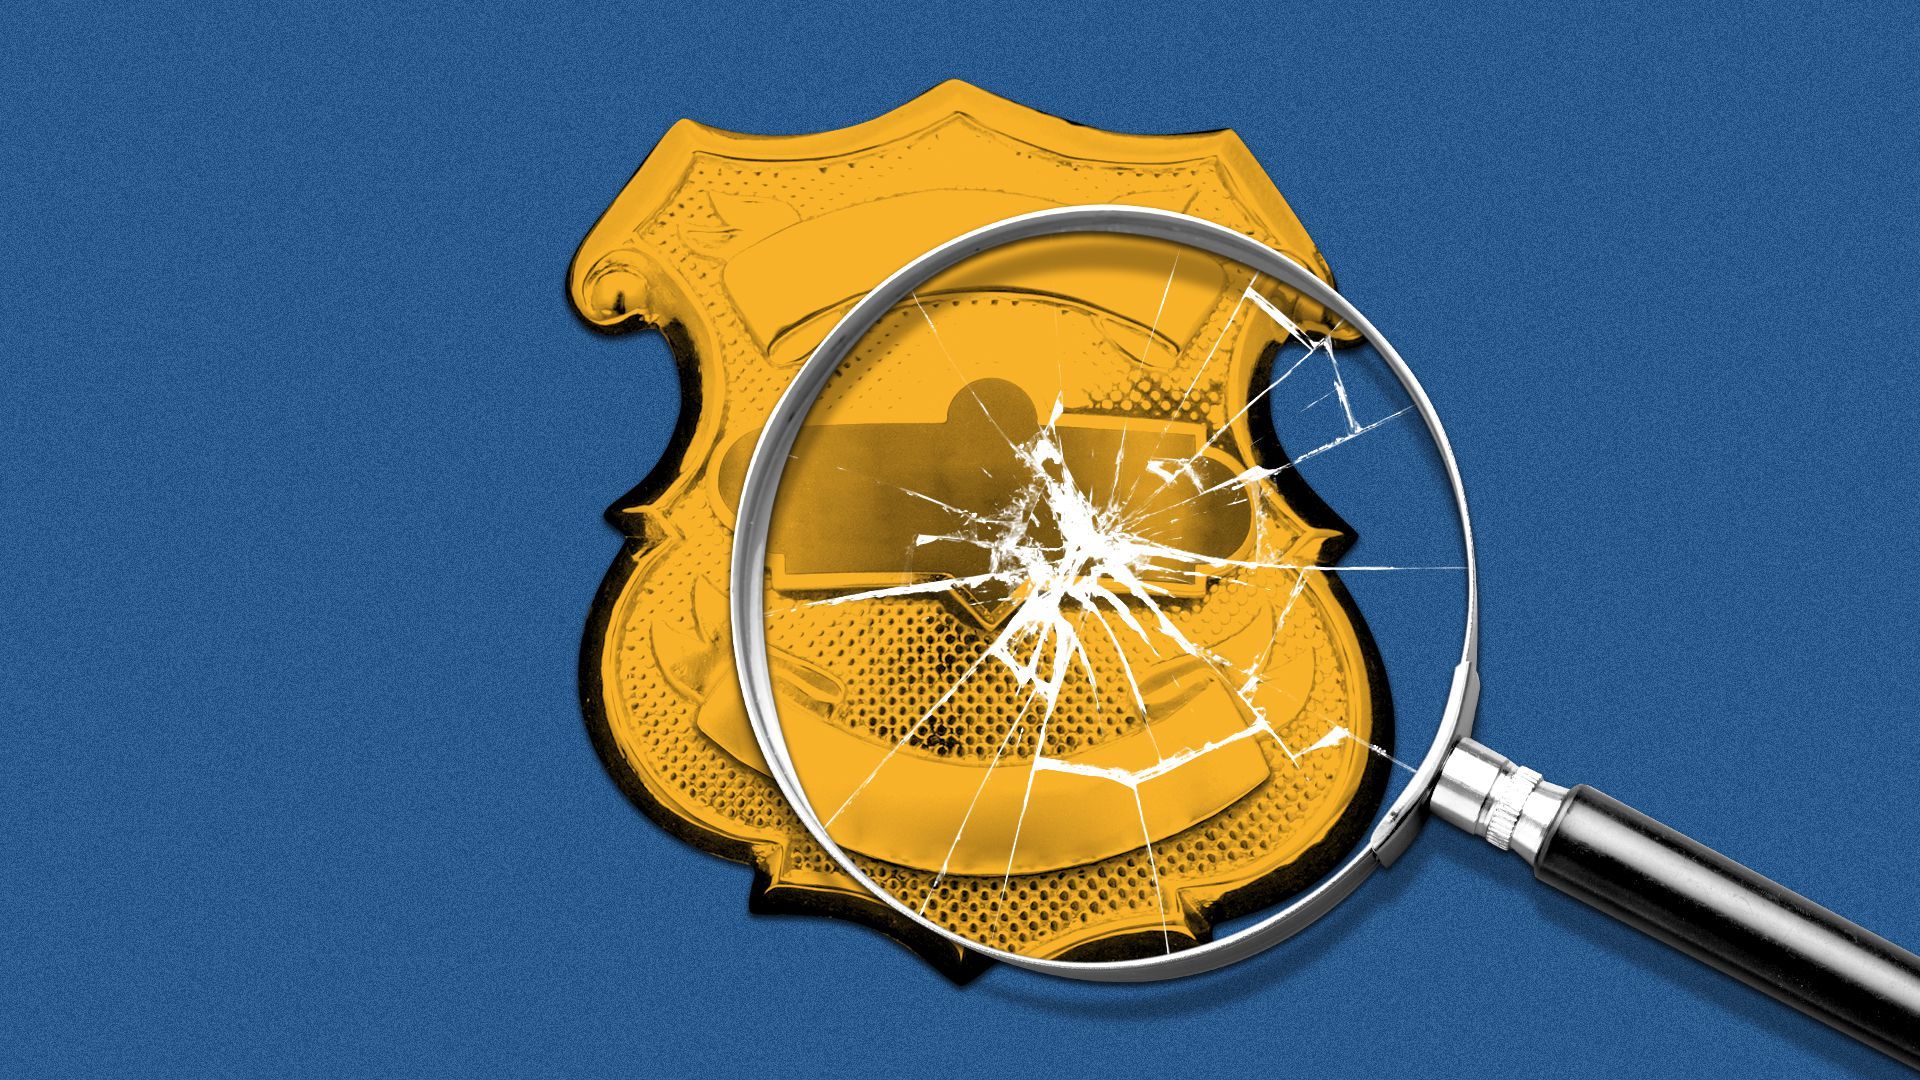 Illustration of a cracked magnifying glass over a police badge. 